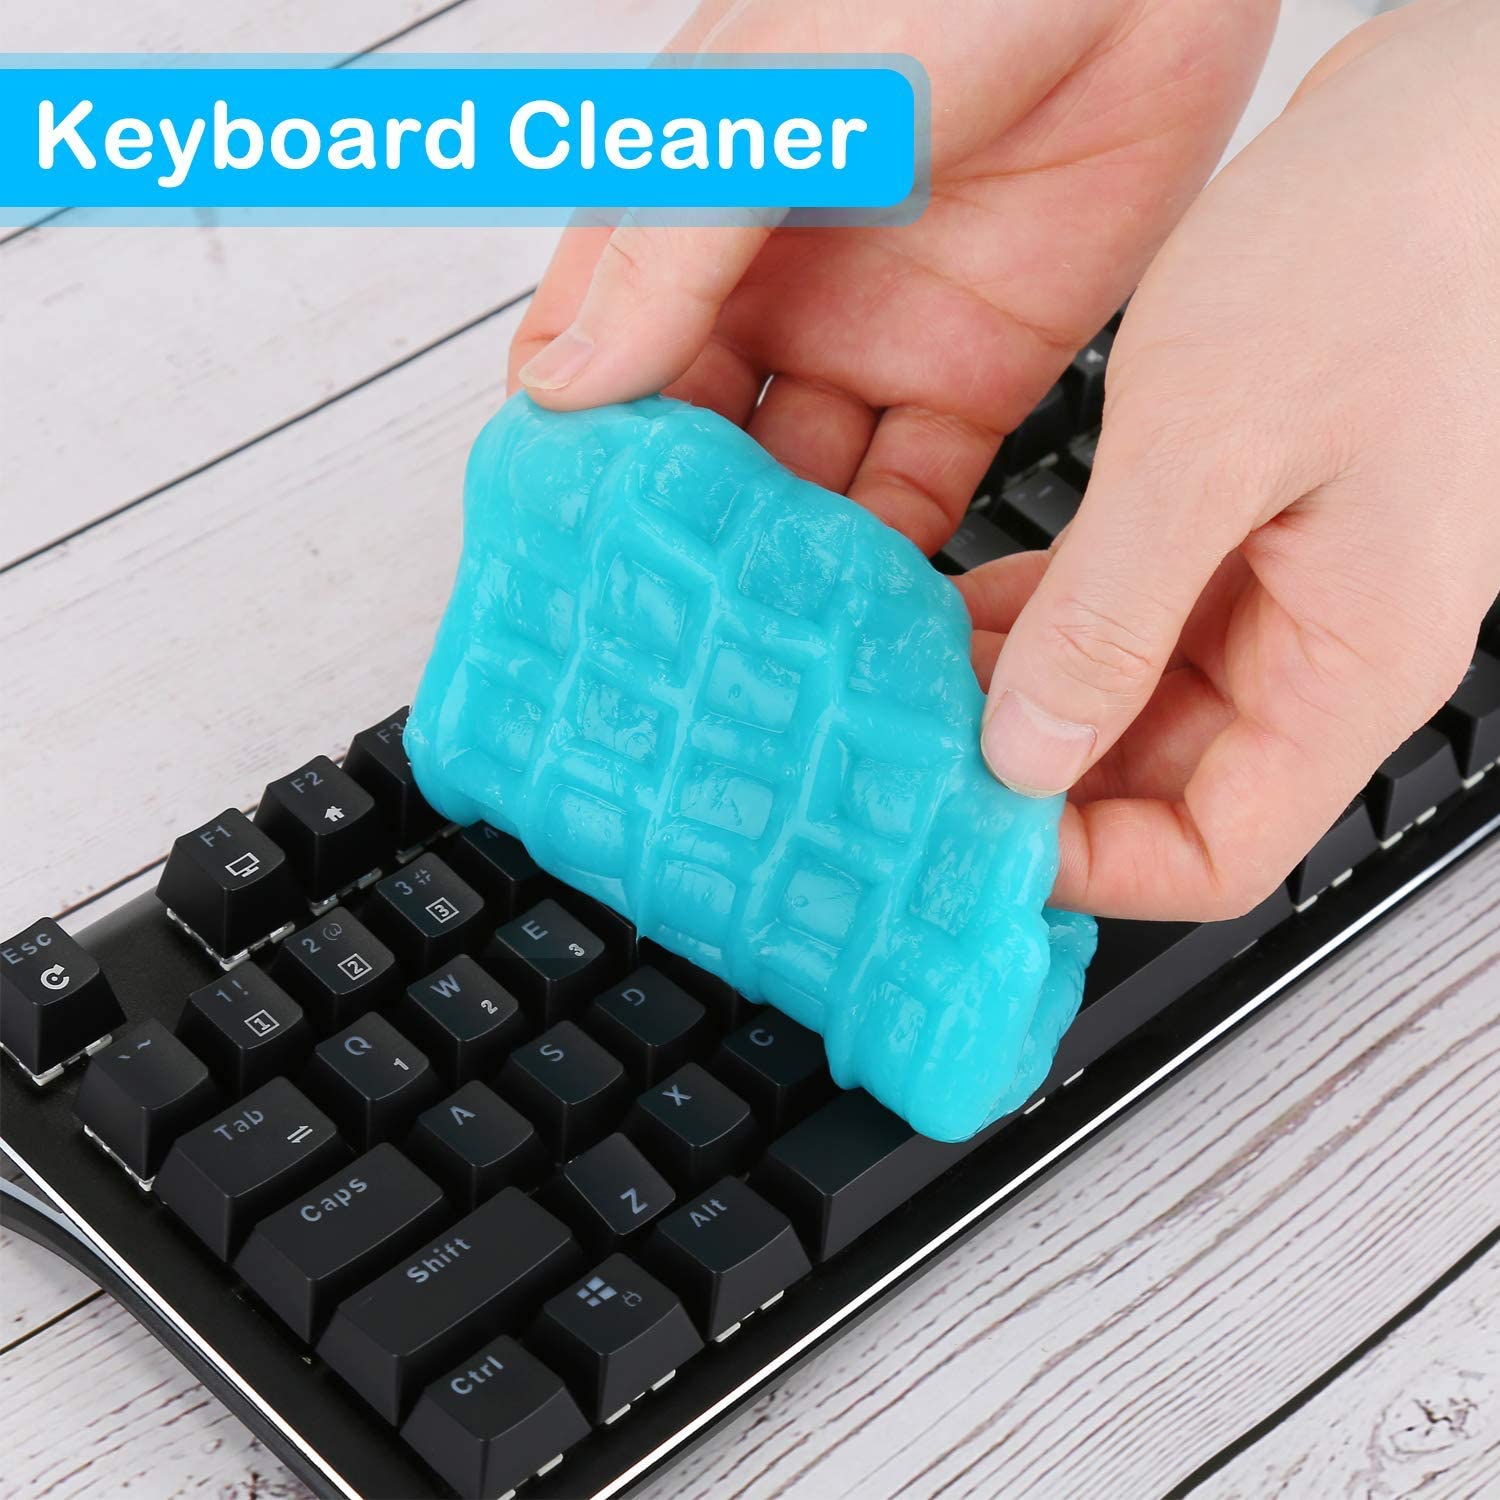 🚙Car Cleaning Gel Universal Dust Cleaning Slime for Keyboard Cleaning Auto  Detailing🚙 - Keyboards & Keypads - Alexandria, Virginia, Facebook  Marketplace